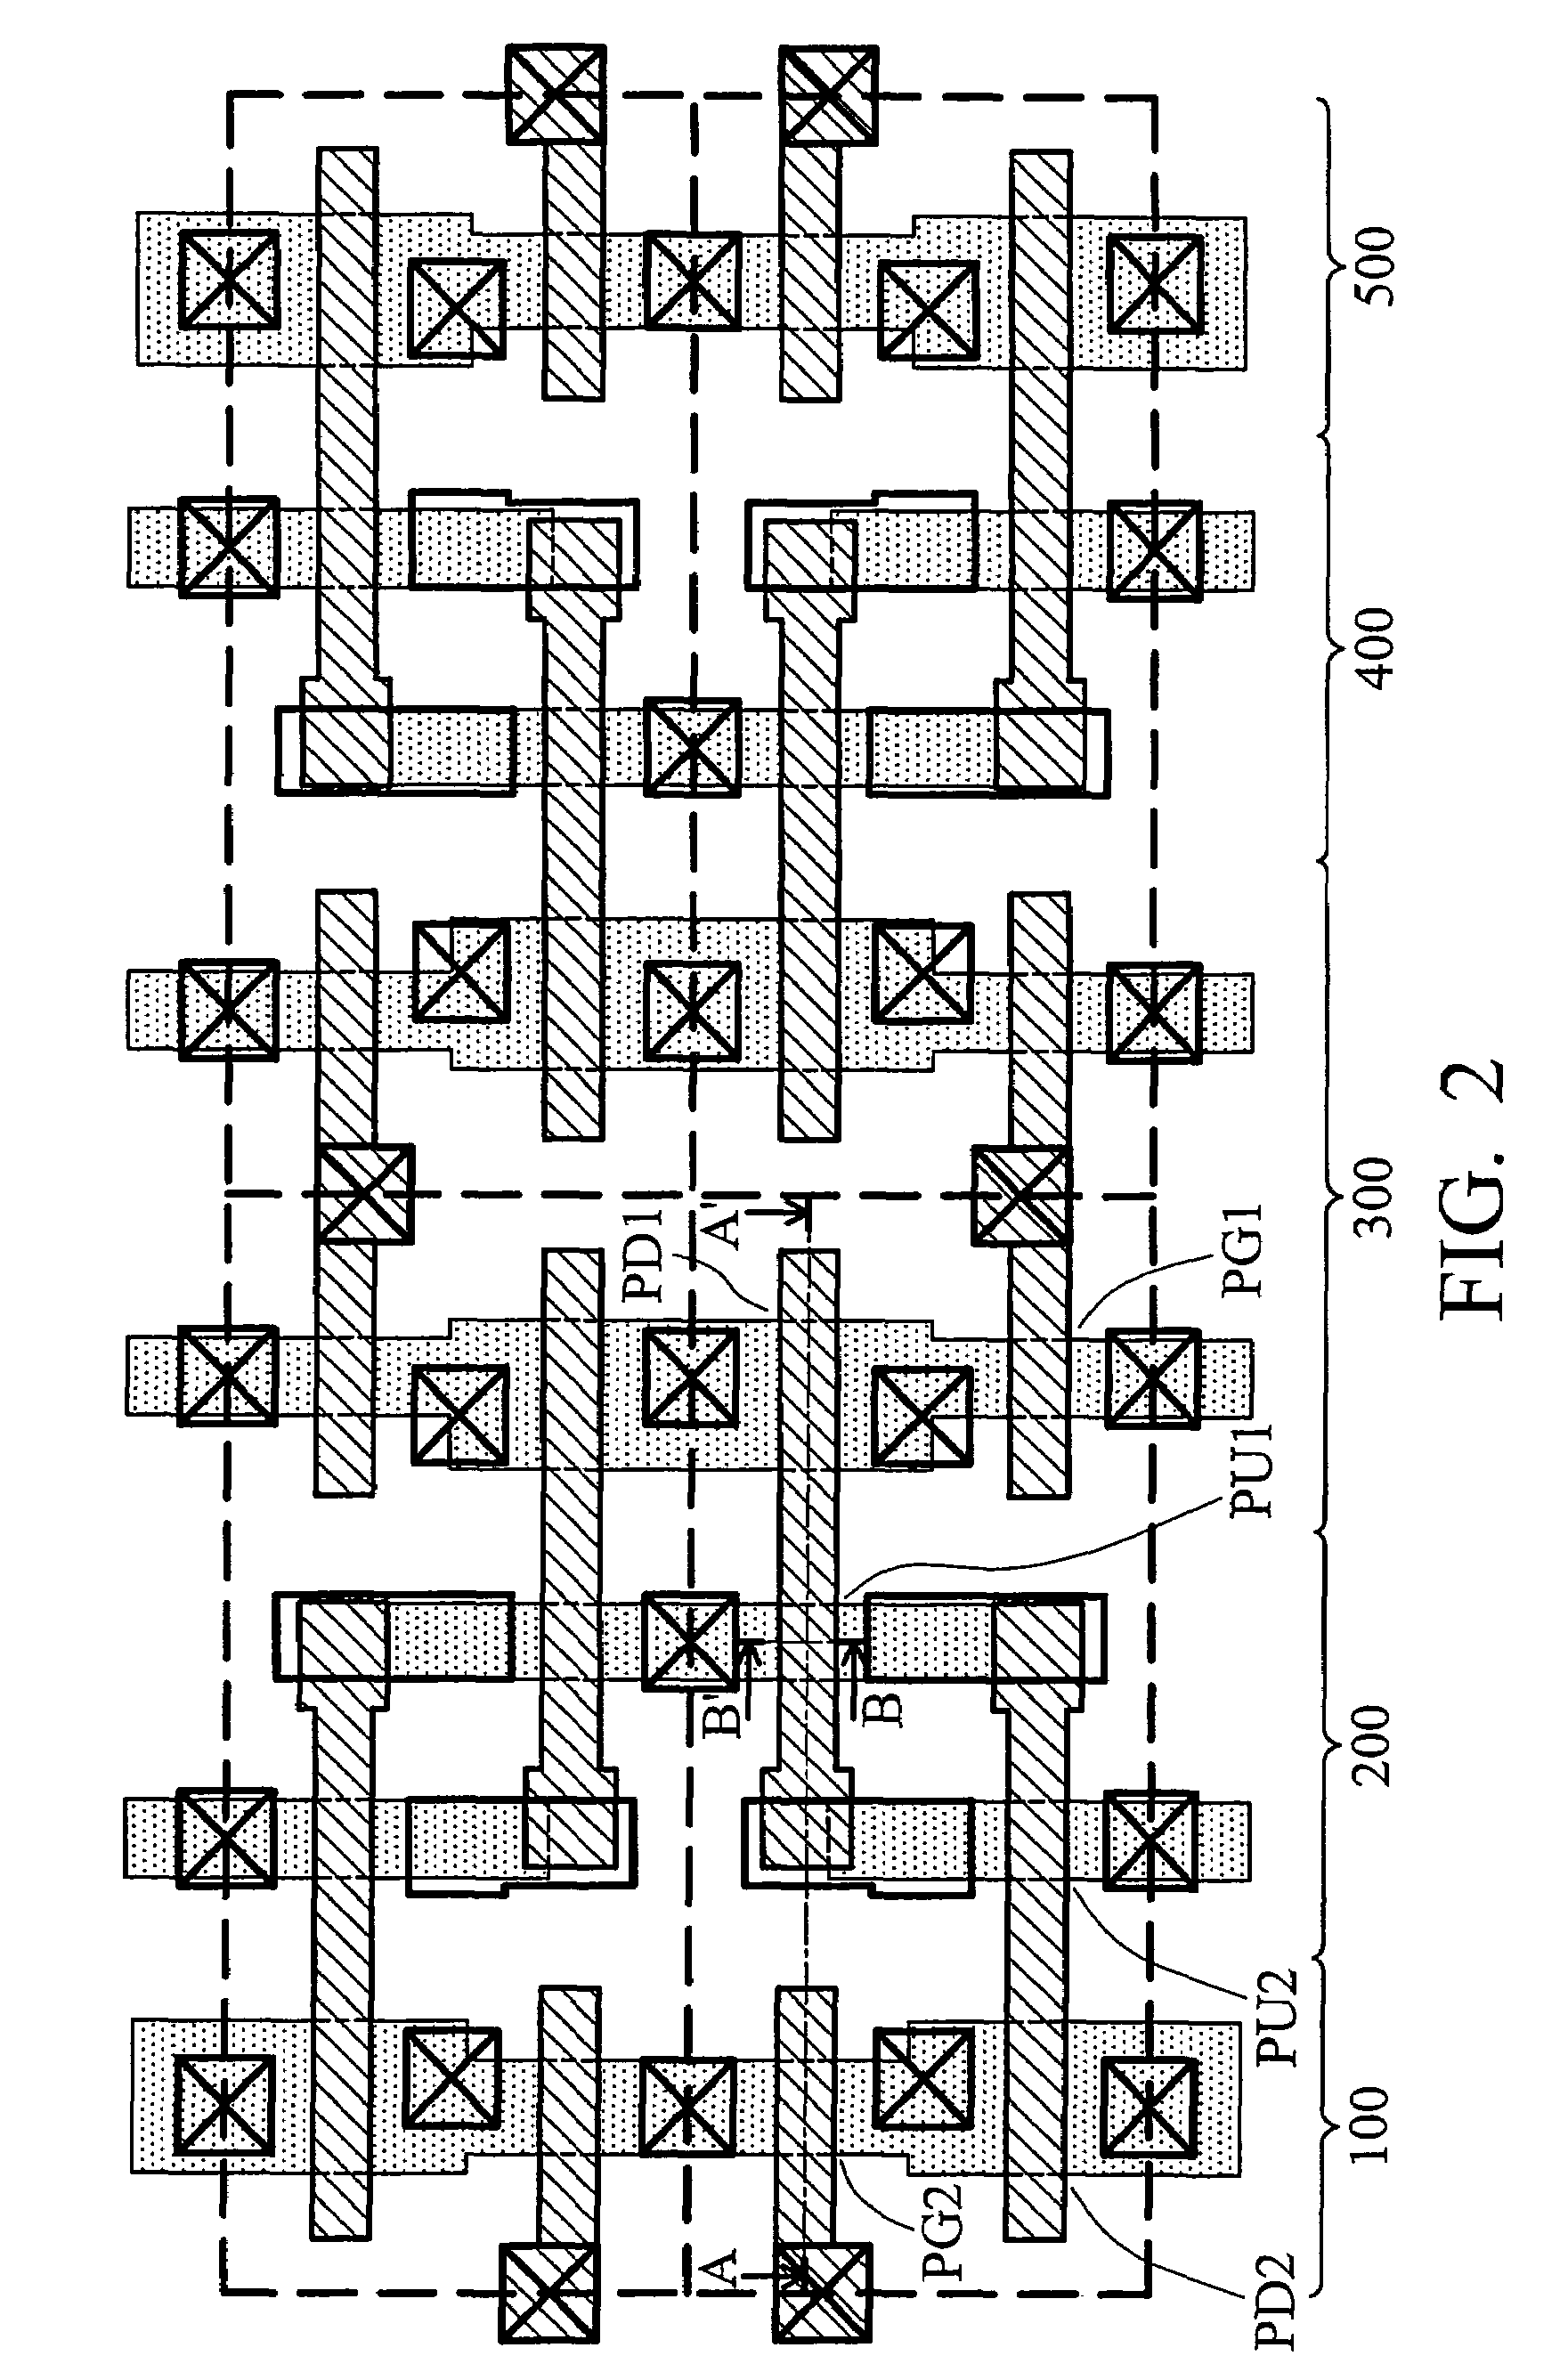 Partial FinFET memory cell